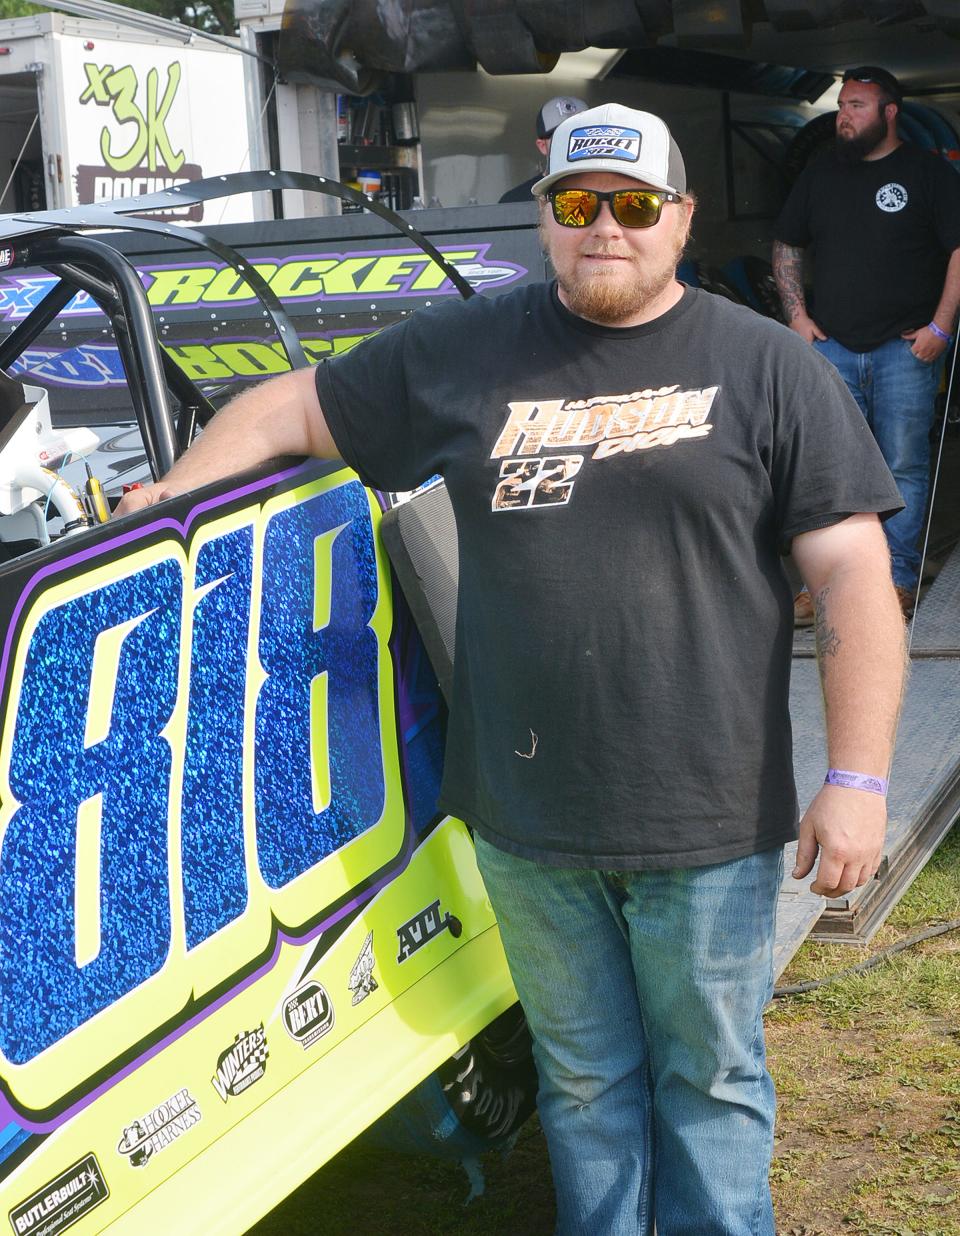 Matt Hammond has overcome a broken back from a motocross accident to become a force in pro late model racing in the area.